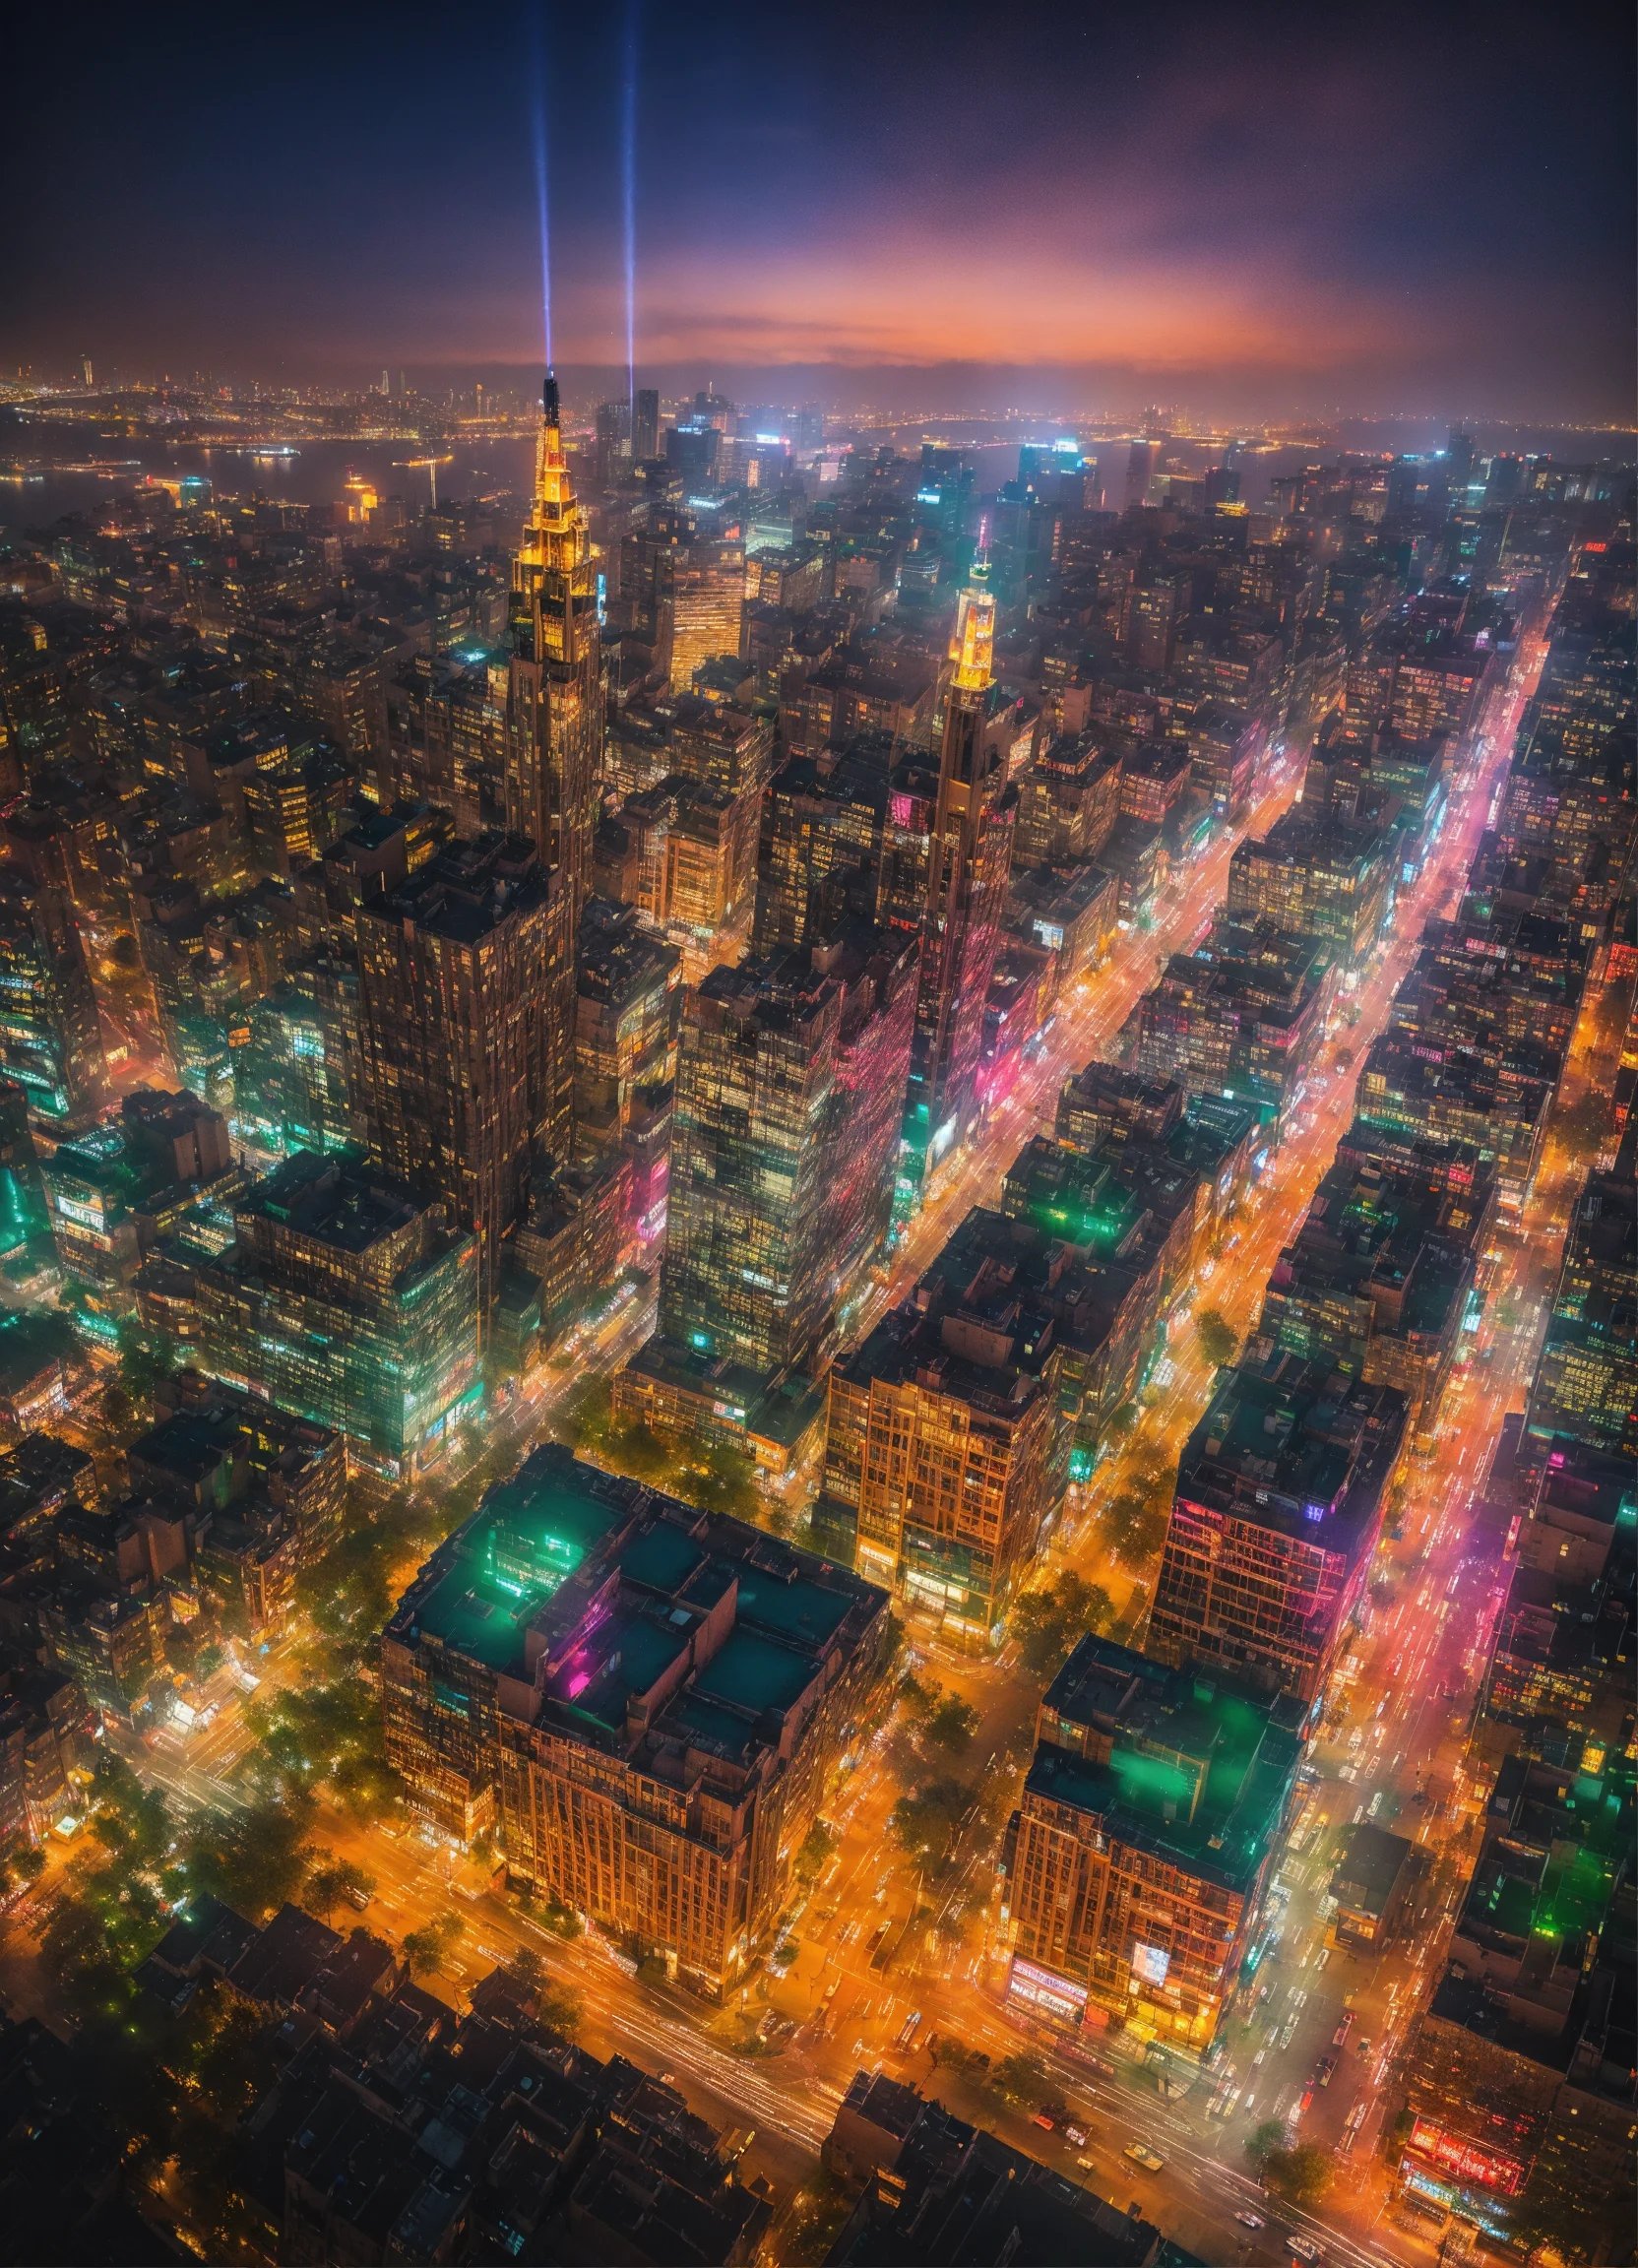 The city at night as seen from the air drone photo.jpg